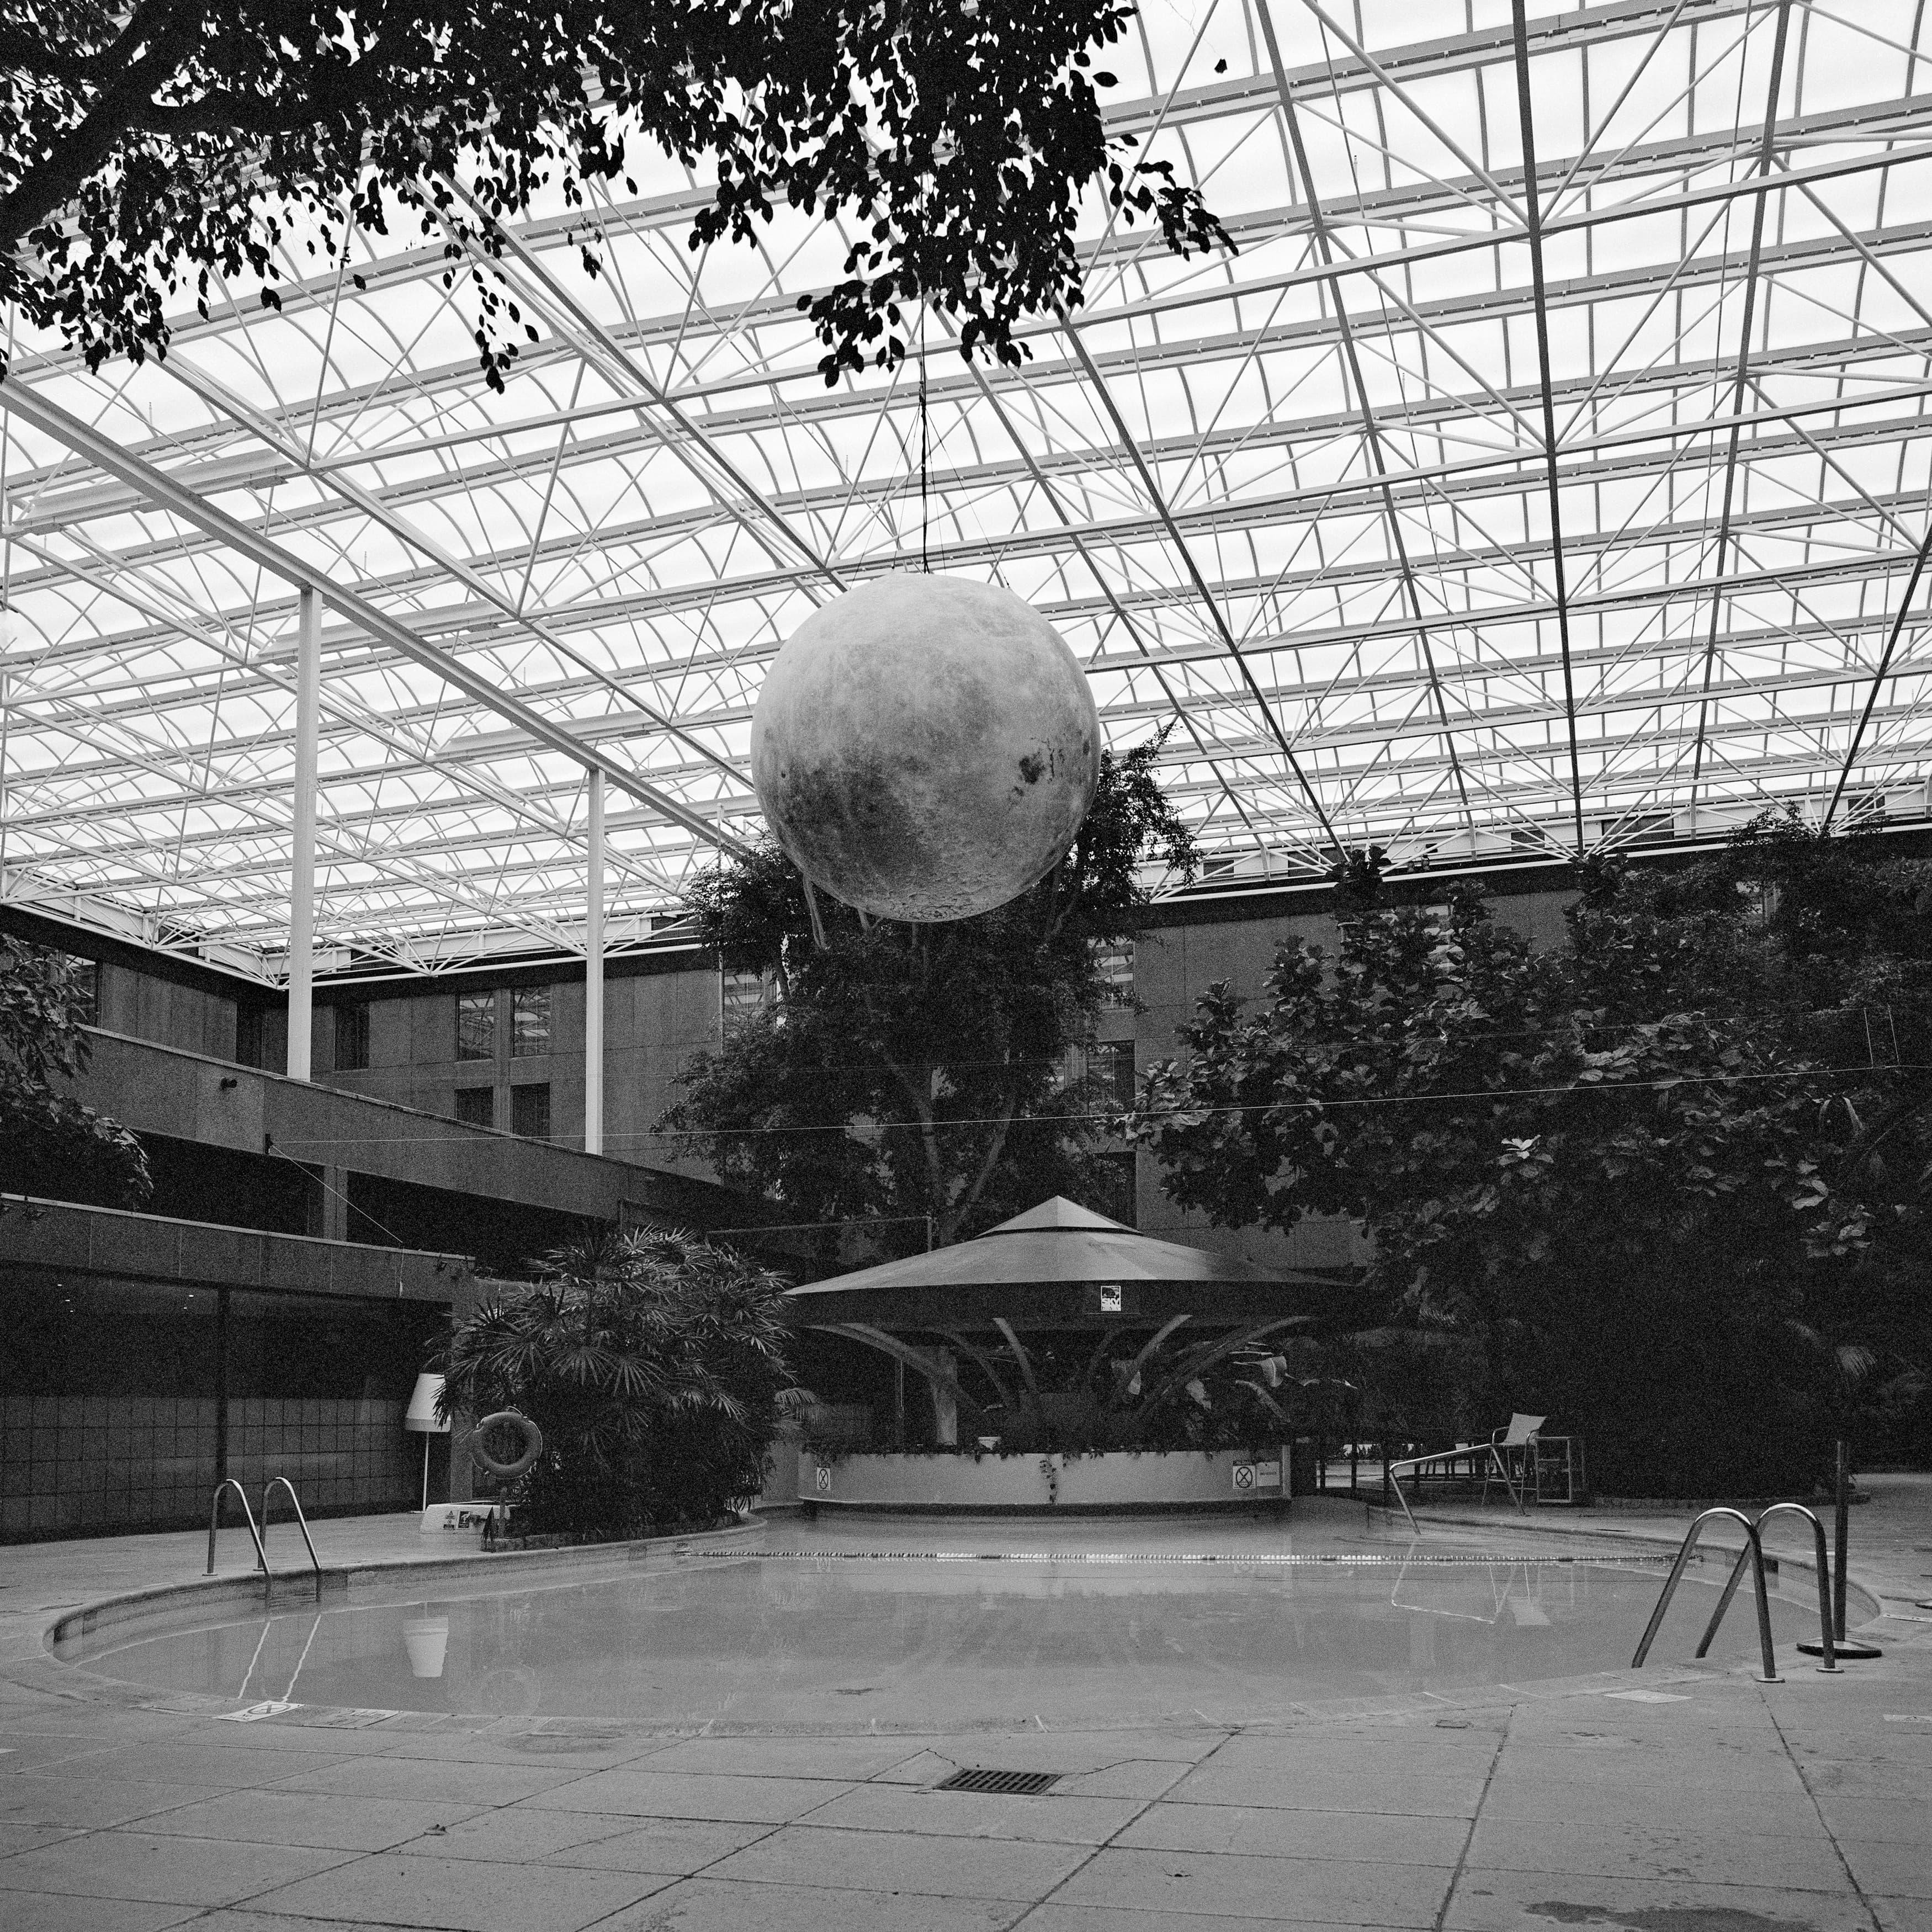 Anna Dobrovolskaya-Mints Black and White Photograph - Black & White Square Architectural Photography: Hotel Pool with Moon-like Sphere